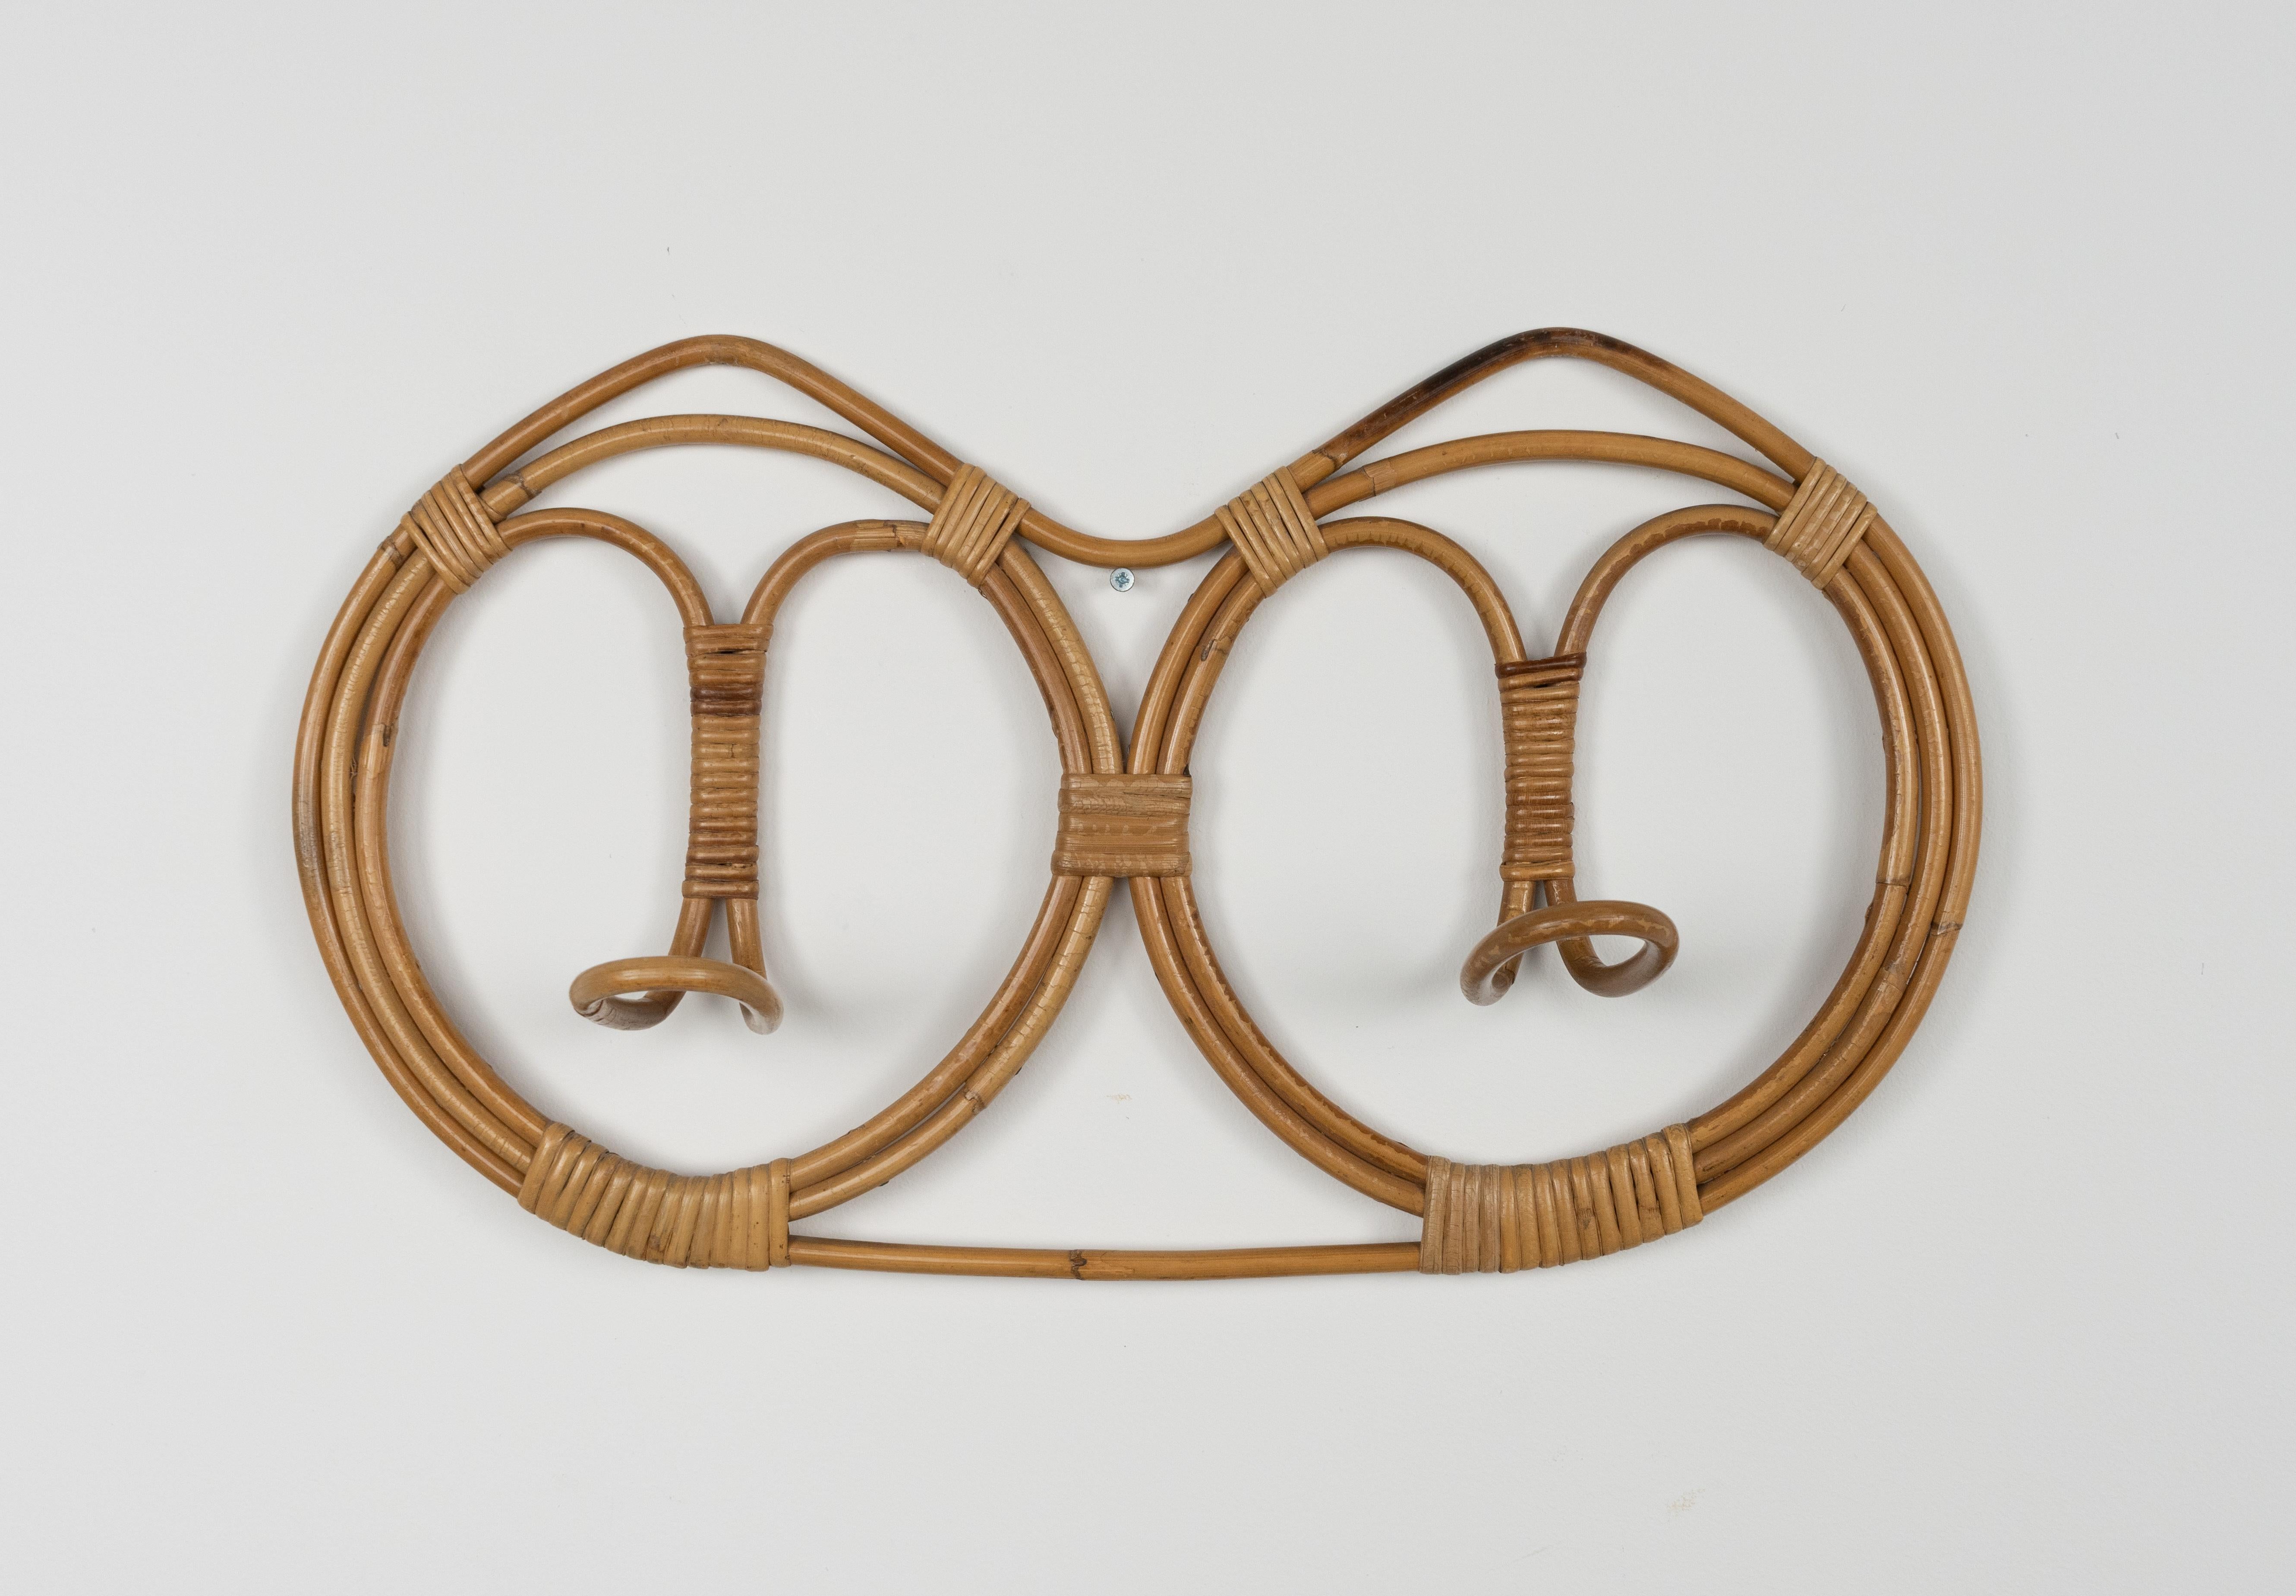 Midcentury beautiful wall coat rack in bamboo and rattan by Franco Albini & Franca Helg.

Made in Italy in the 1960s.